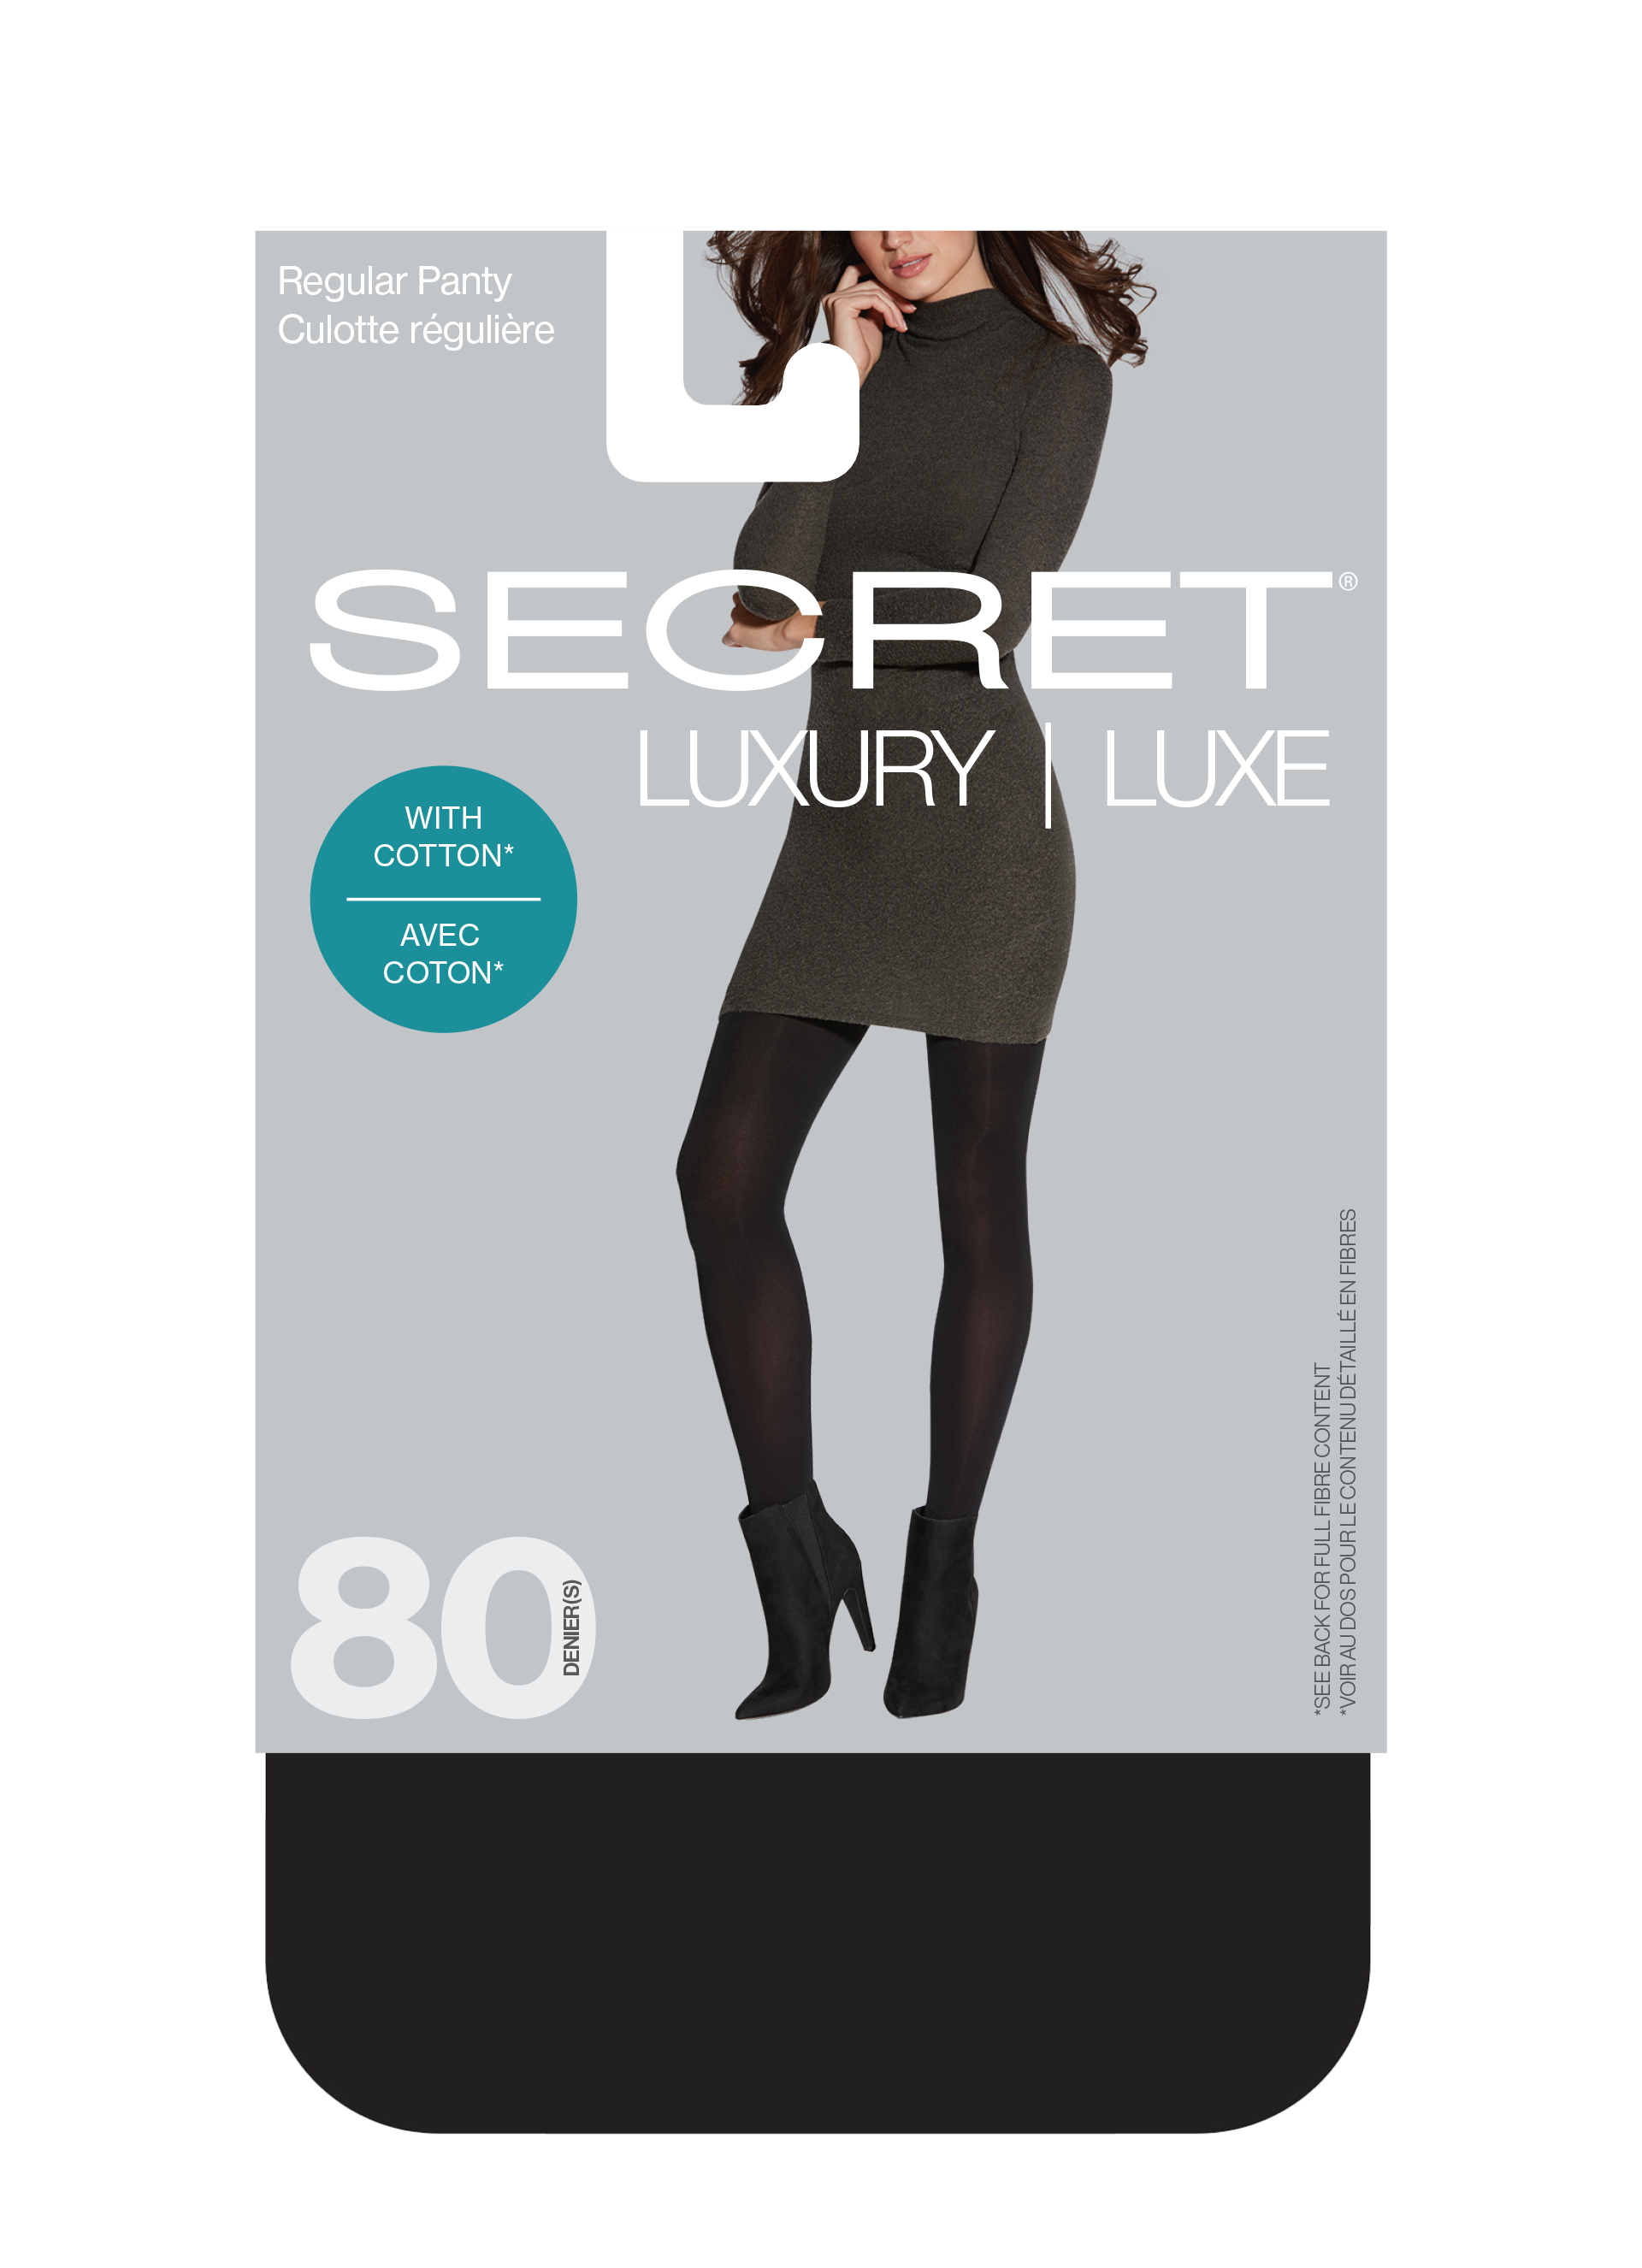 SECRET® LUXURY Super Opaque Cotton Tights | 80 Denier Sheer Black Tights With a Regular Panty